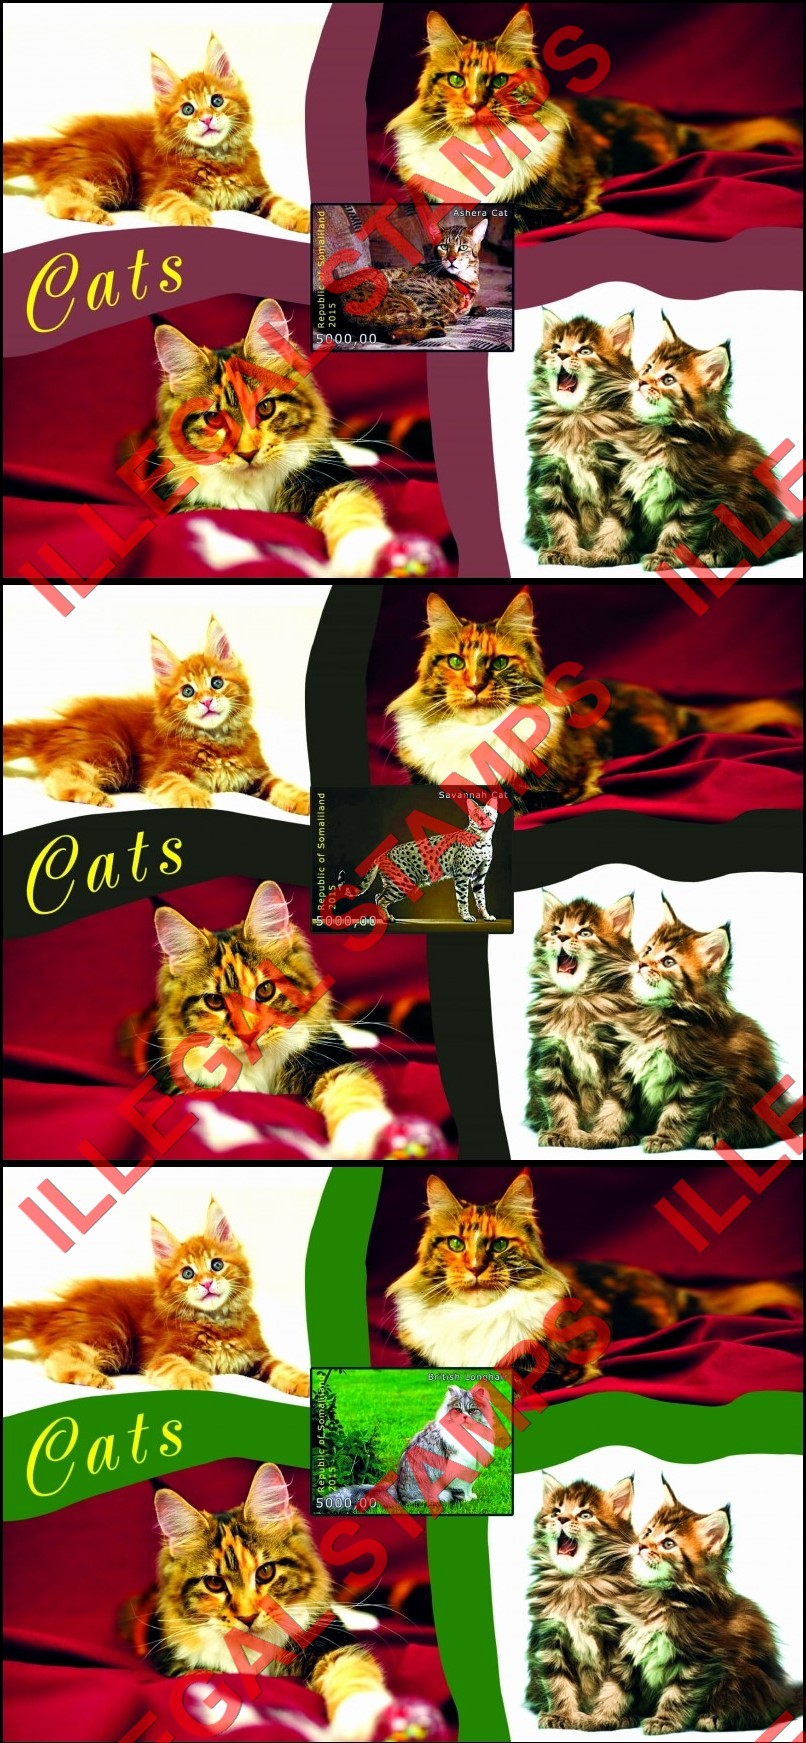 Somaliland 2015 Cats Illegal Stamp Souvenir Sheets of 1 (Part 2)